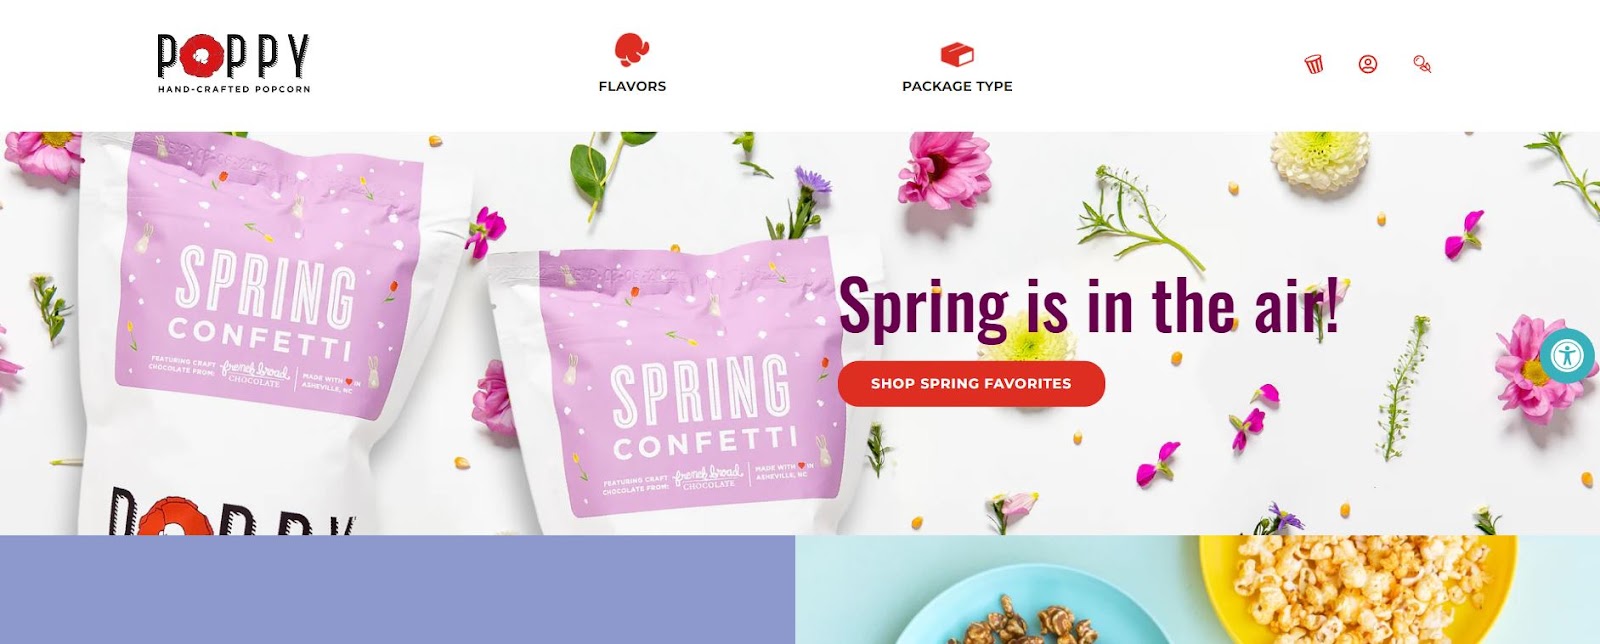 Poppy Handcrafted Popcorn prides itself on excellent customer service